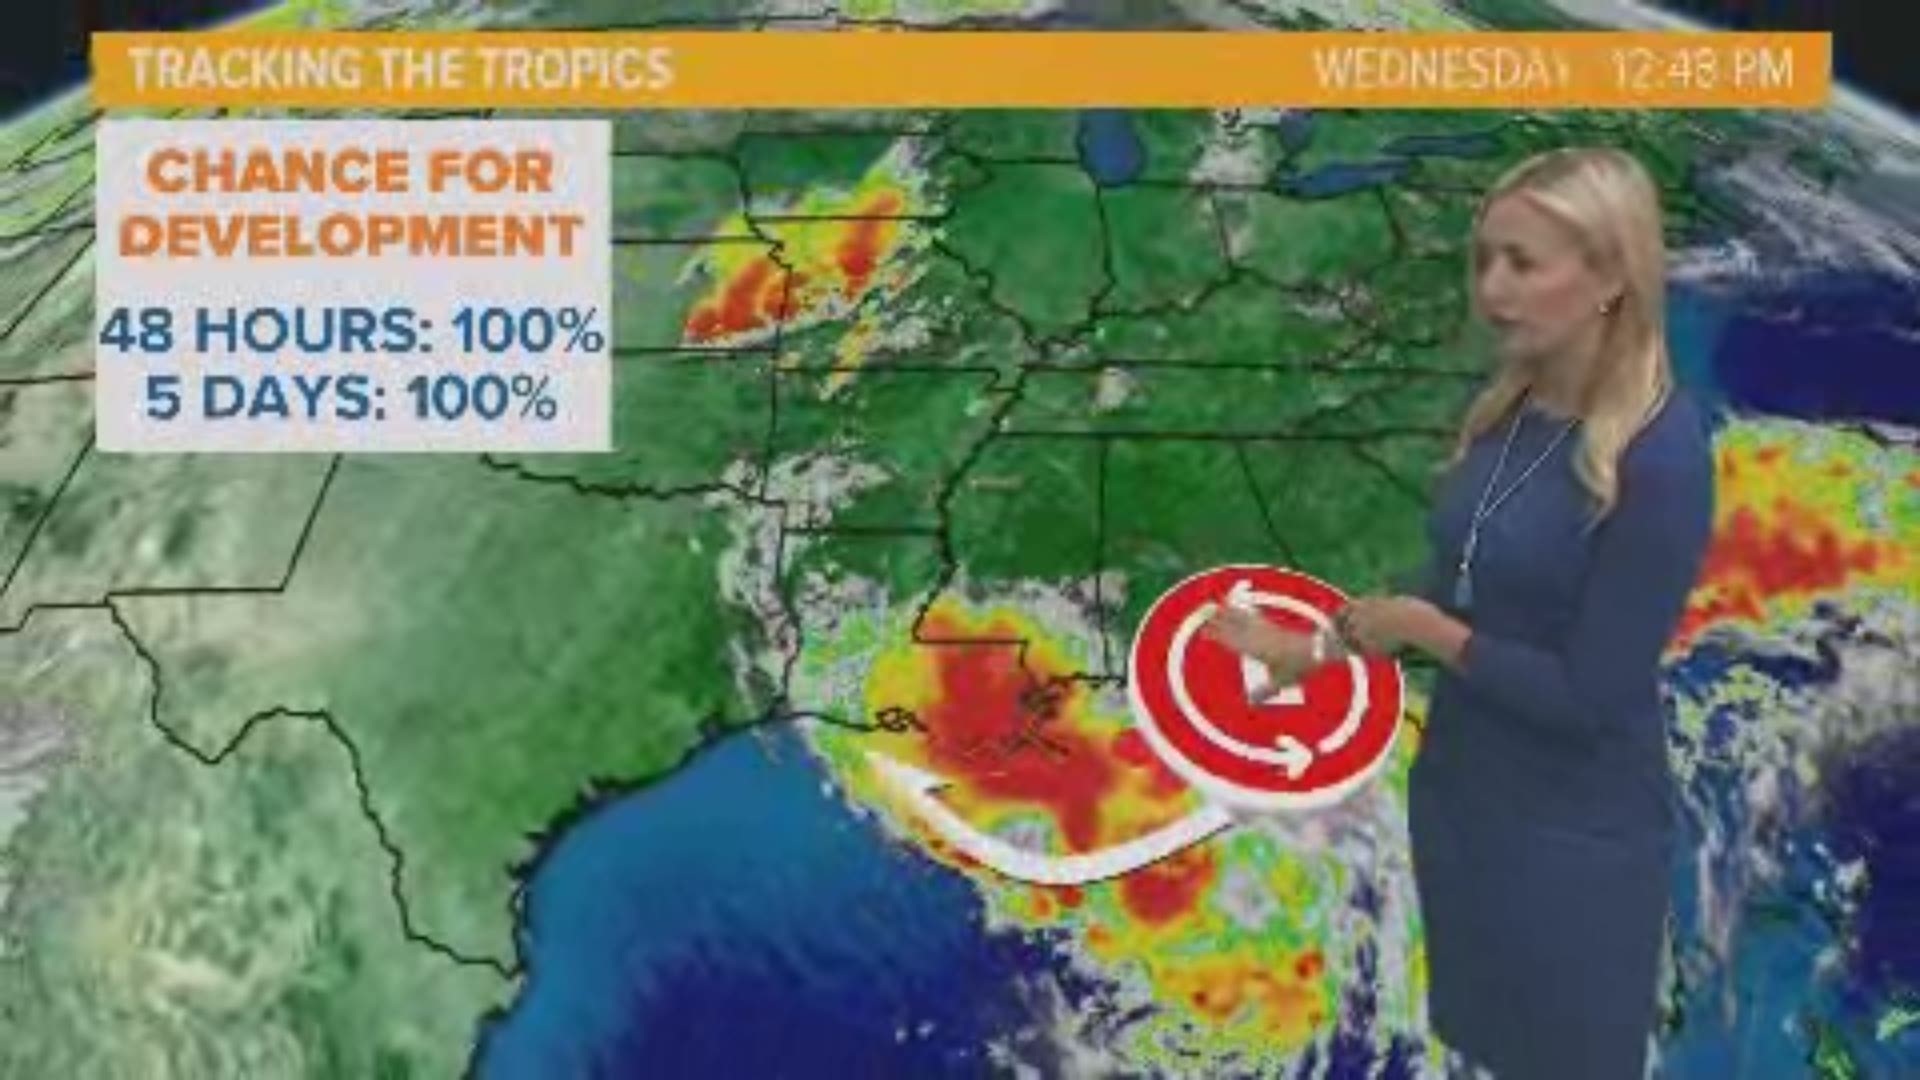 WHAS11's Kaitlynn Fish has the latest on the system impacting the Gulf Coast.